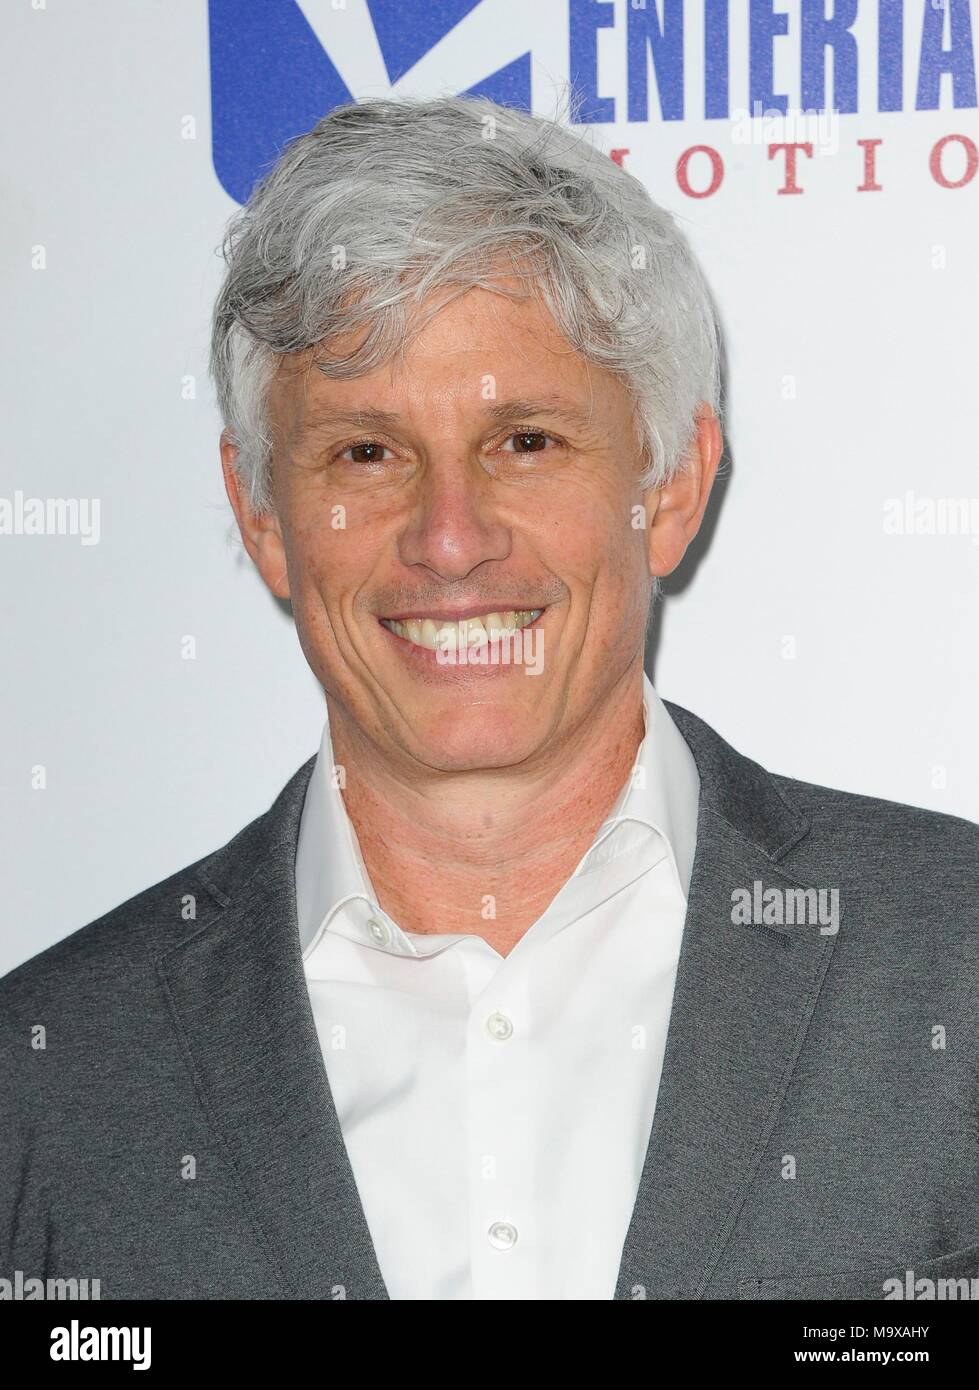 Los Angeles, CA, USA. 28th Mar, 2018. John Curran at arrivals for CHAPPAQUIDDICK Premiere, Samuel Goldwyn Theater, Los Angeles, CA March 28, 2018. Credit: Elizabeth Goodenough/Everett Collection/Alamy Live News Stock Photo